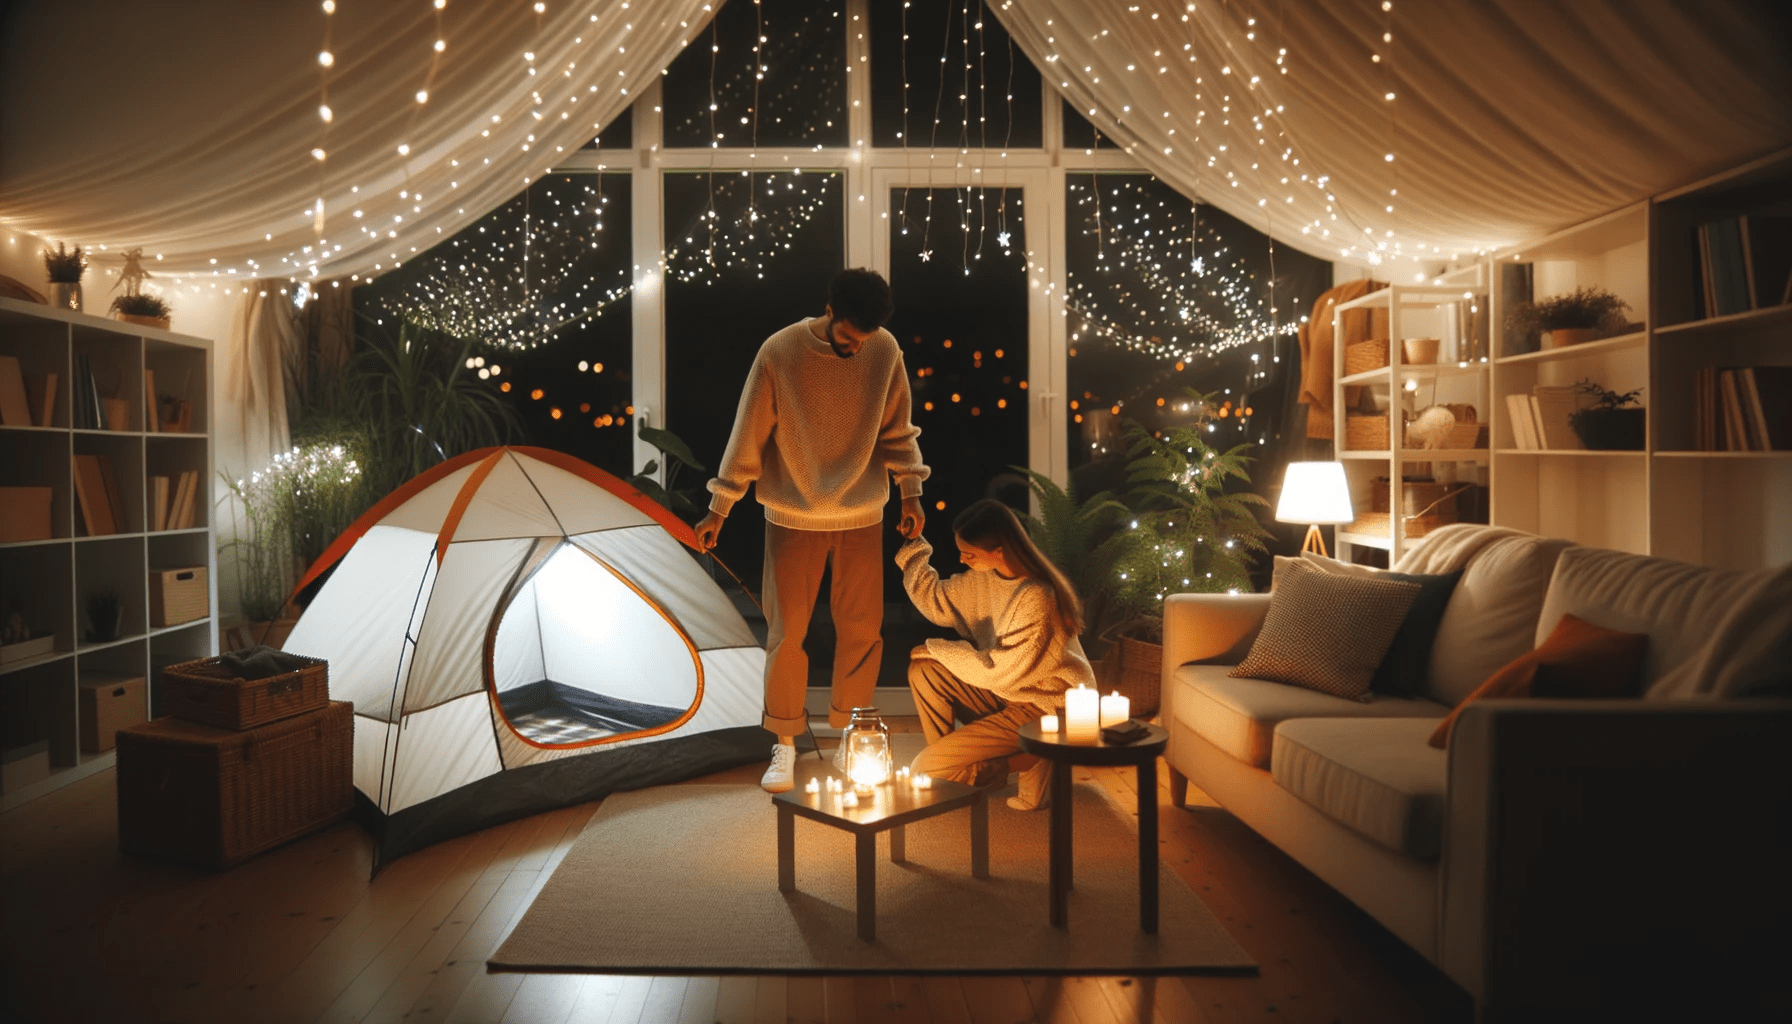 Crazy Things To Do With Boyfriend At Night At Home